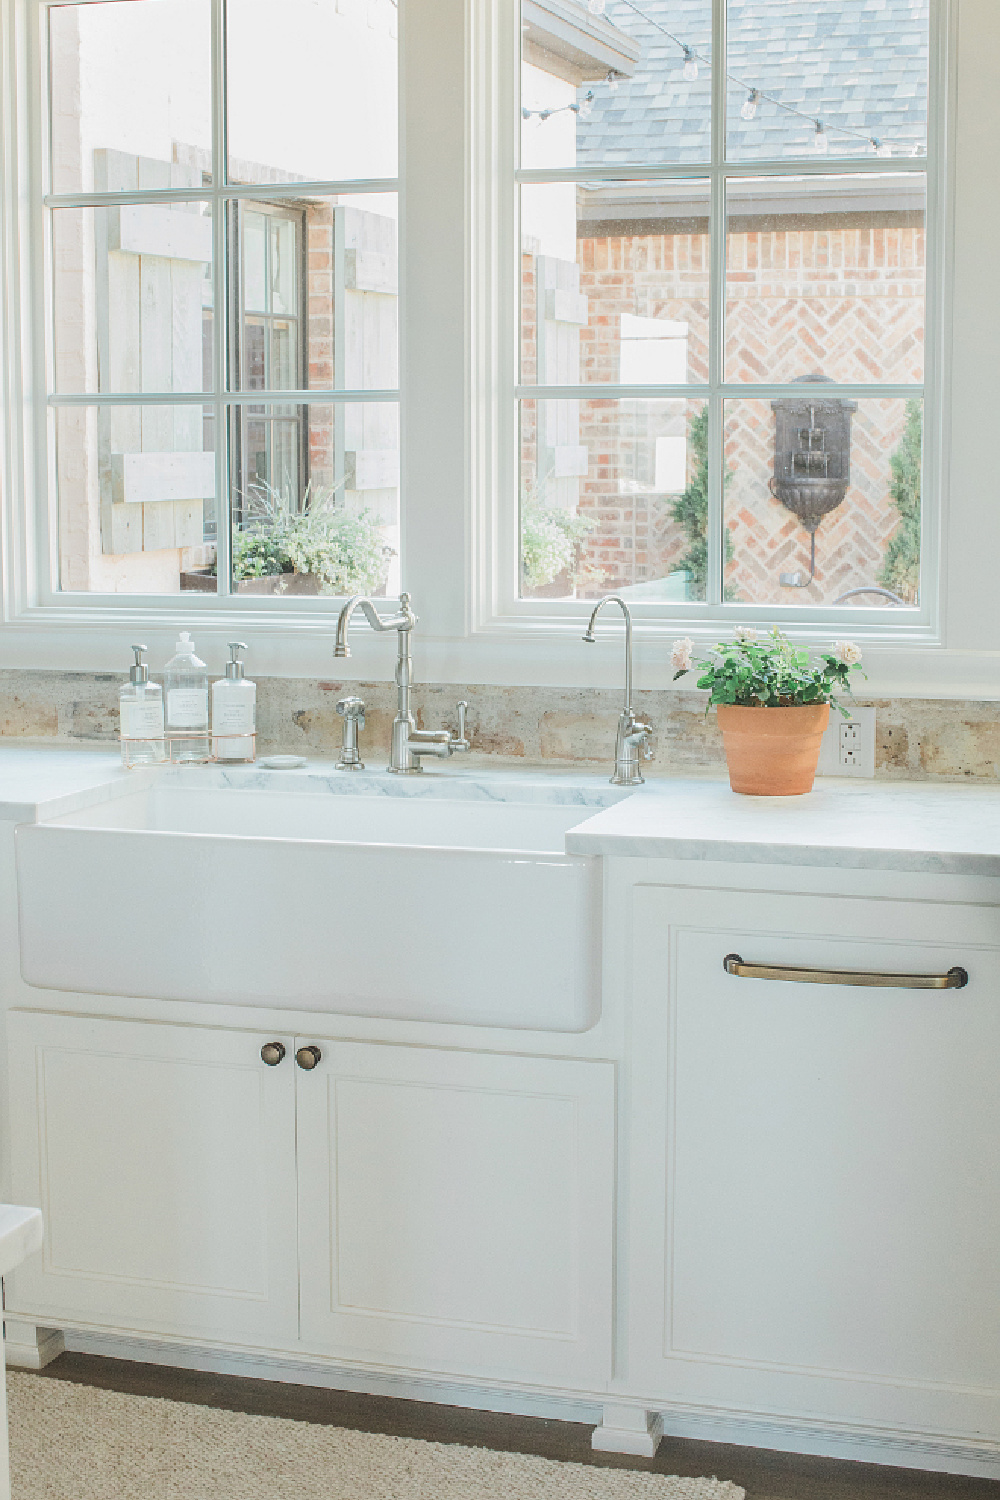 Rustic elegant French country farmhouse white kitchen with farm sink, reclaimed Chicago brick backsplash, and window overlooking courtyard. Brit Jones Design.